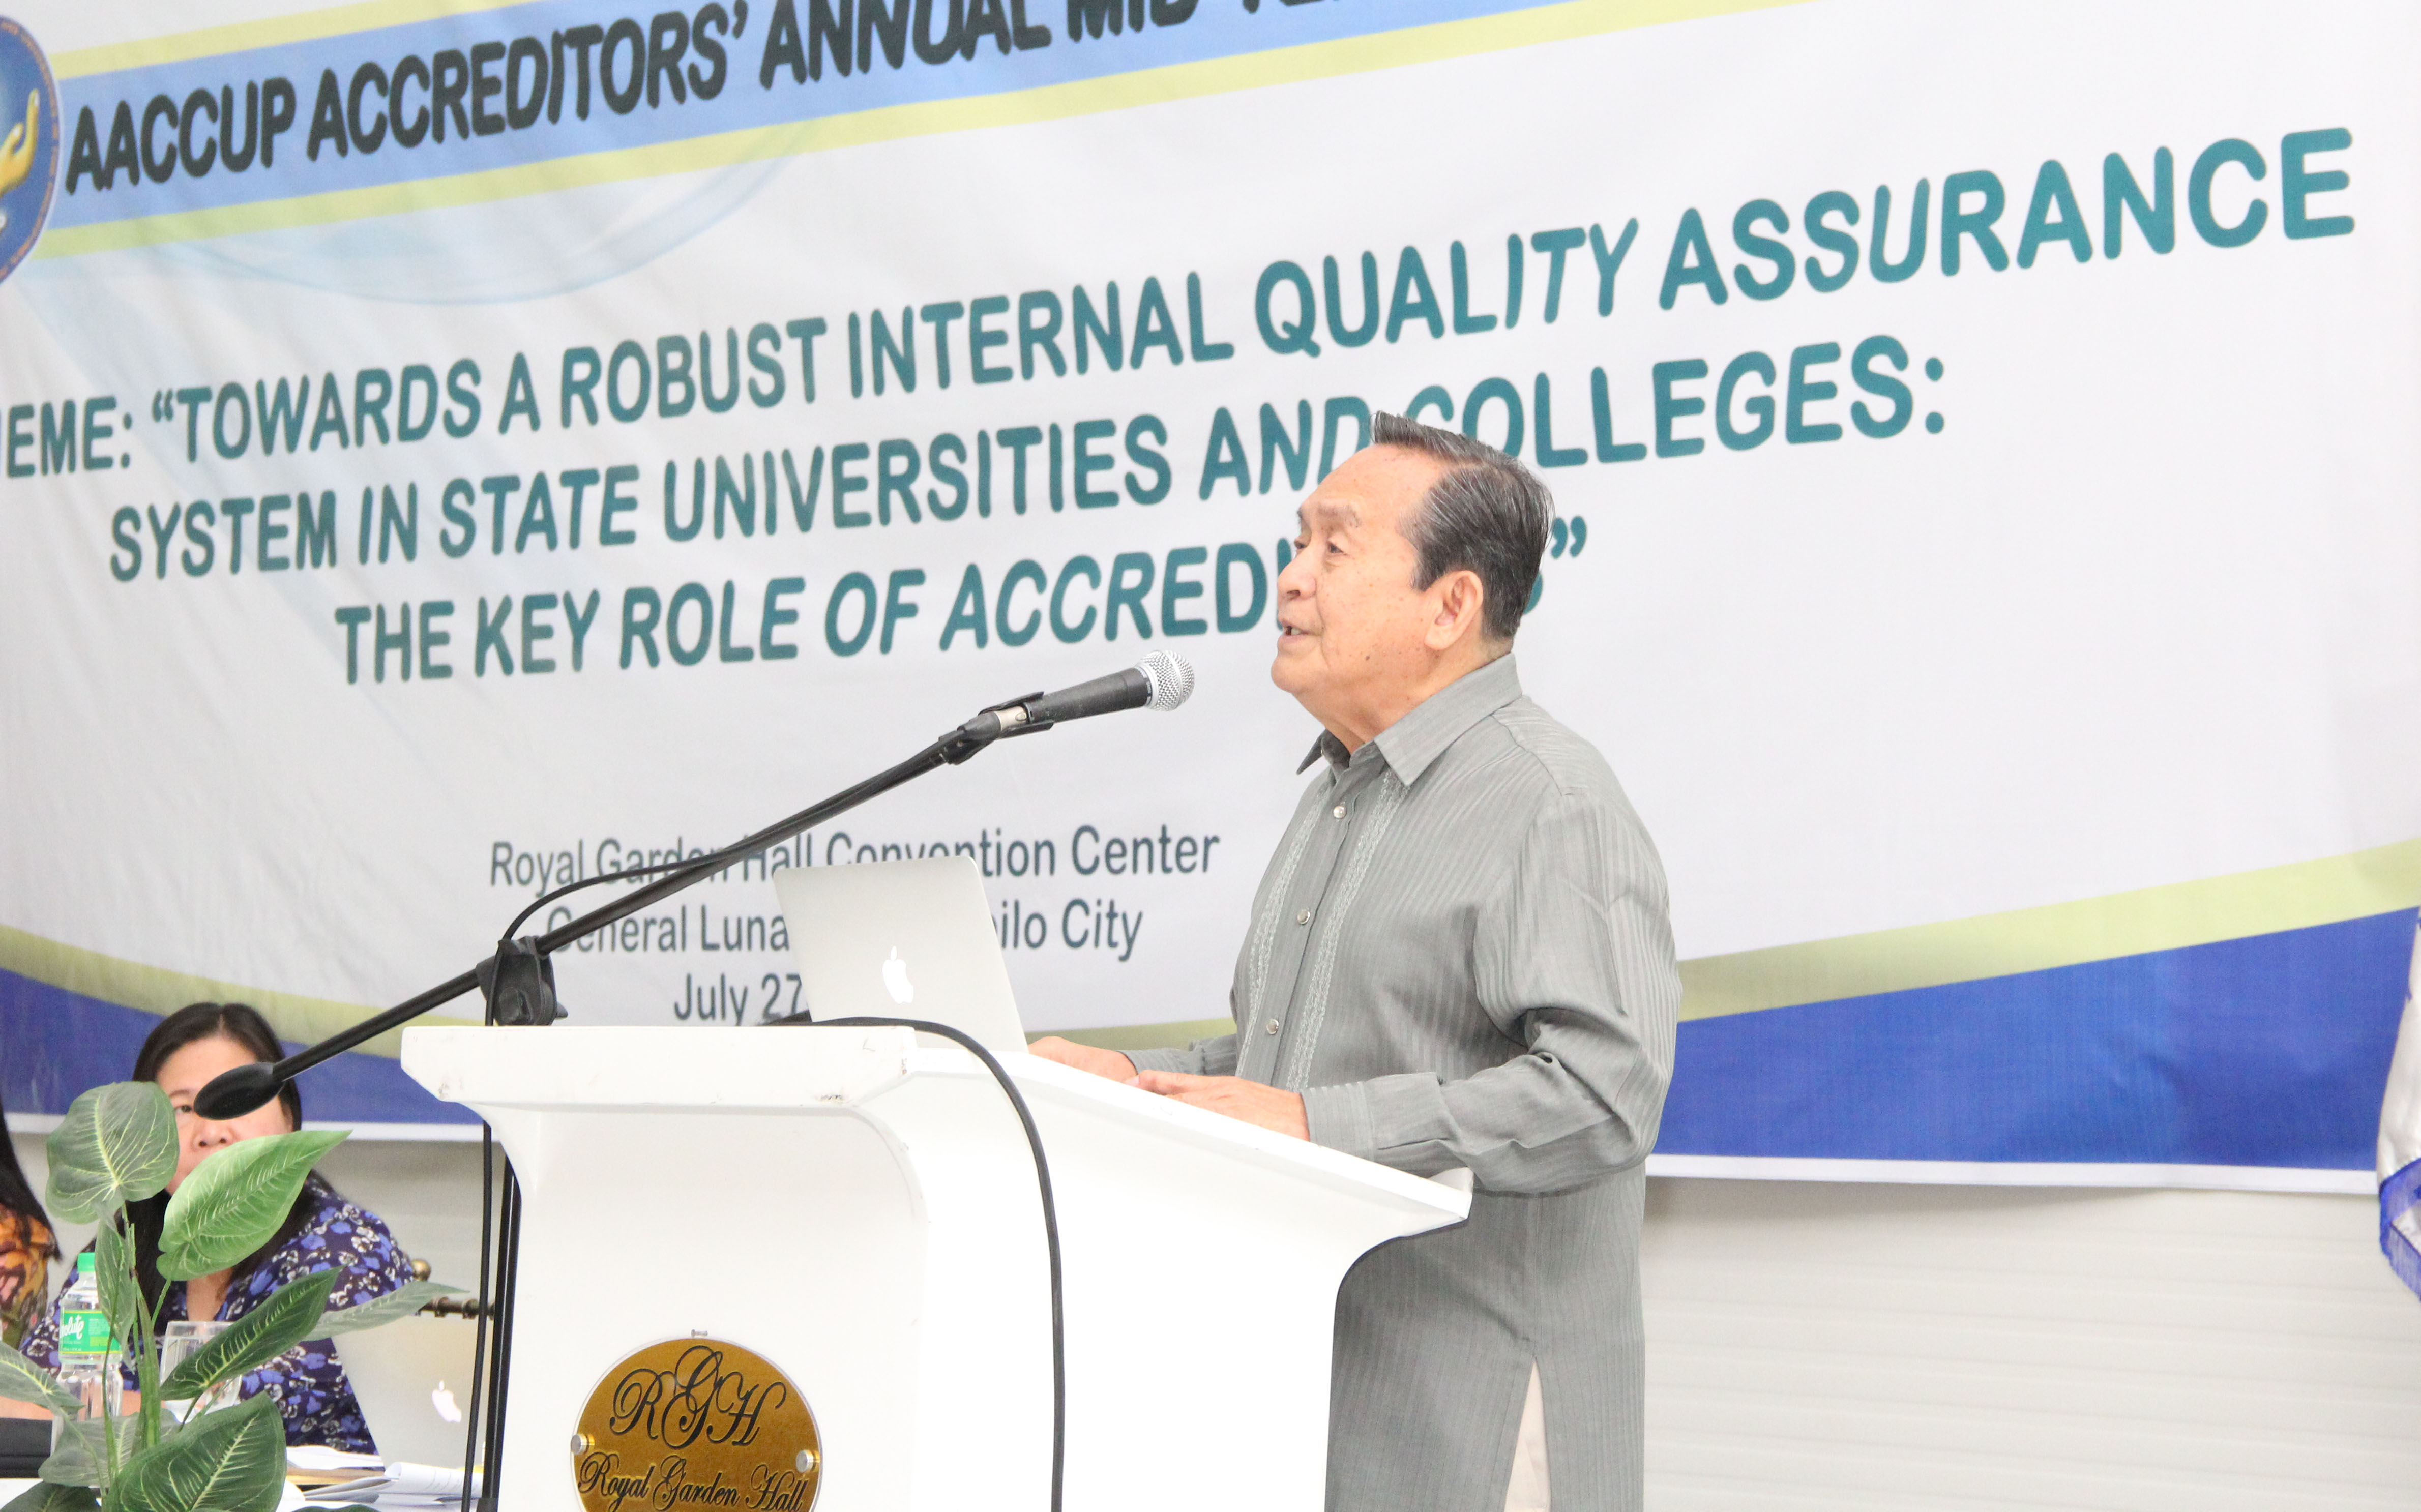 Dr. Manuel T. Corpuz, President and Founding Chairman, AACCUP talks on the Profile of the AACCUP Accreditor.